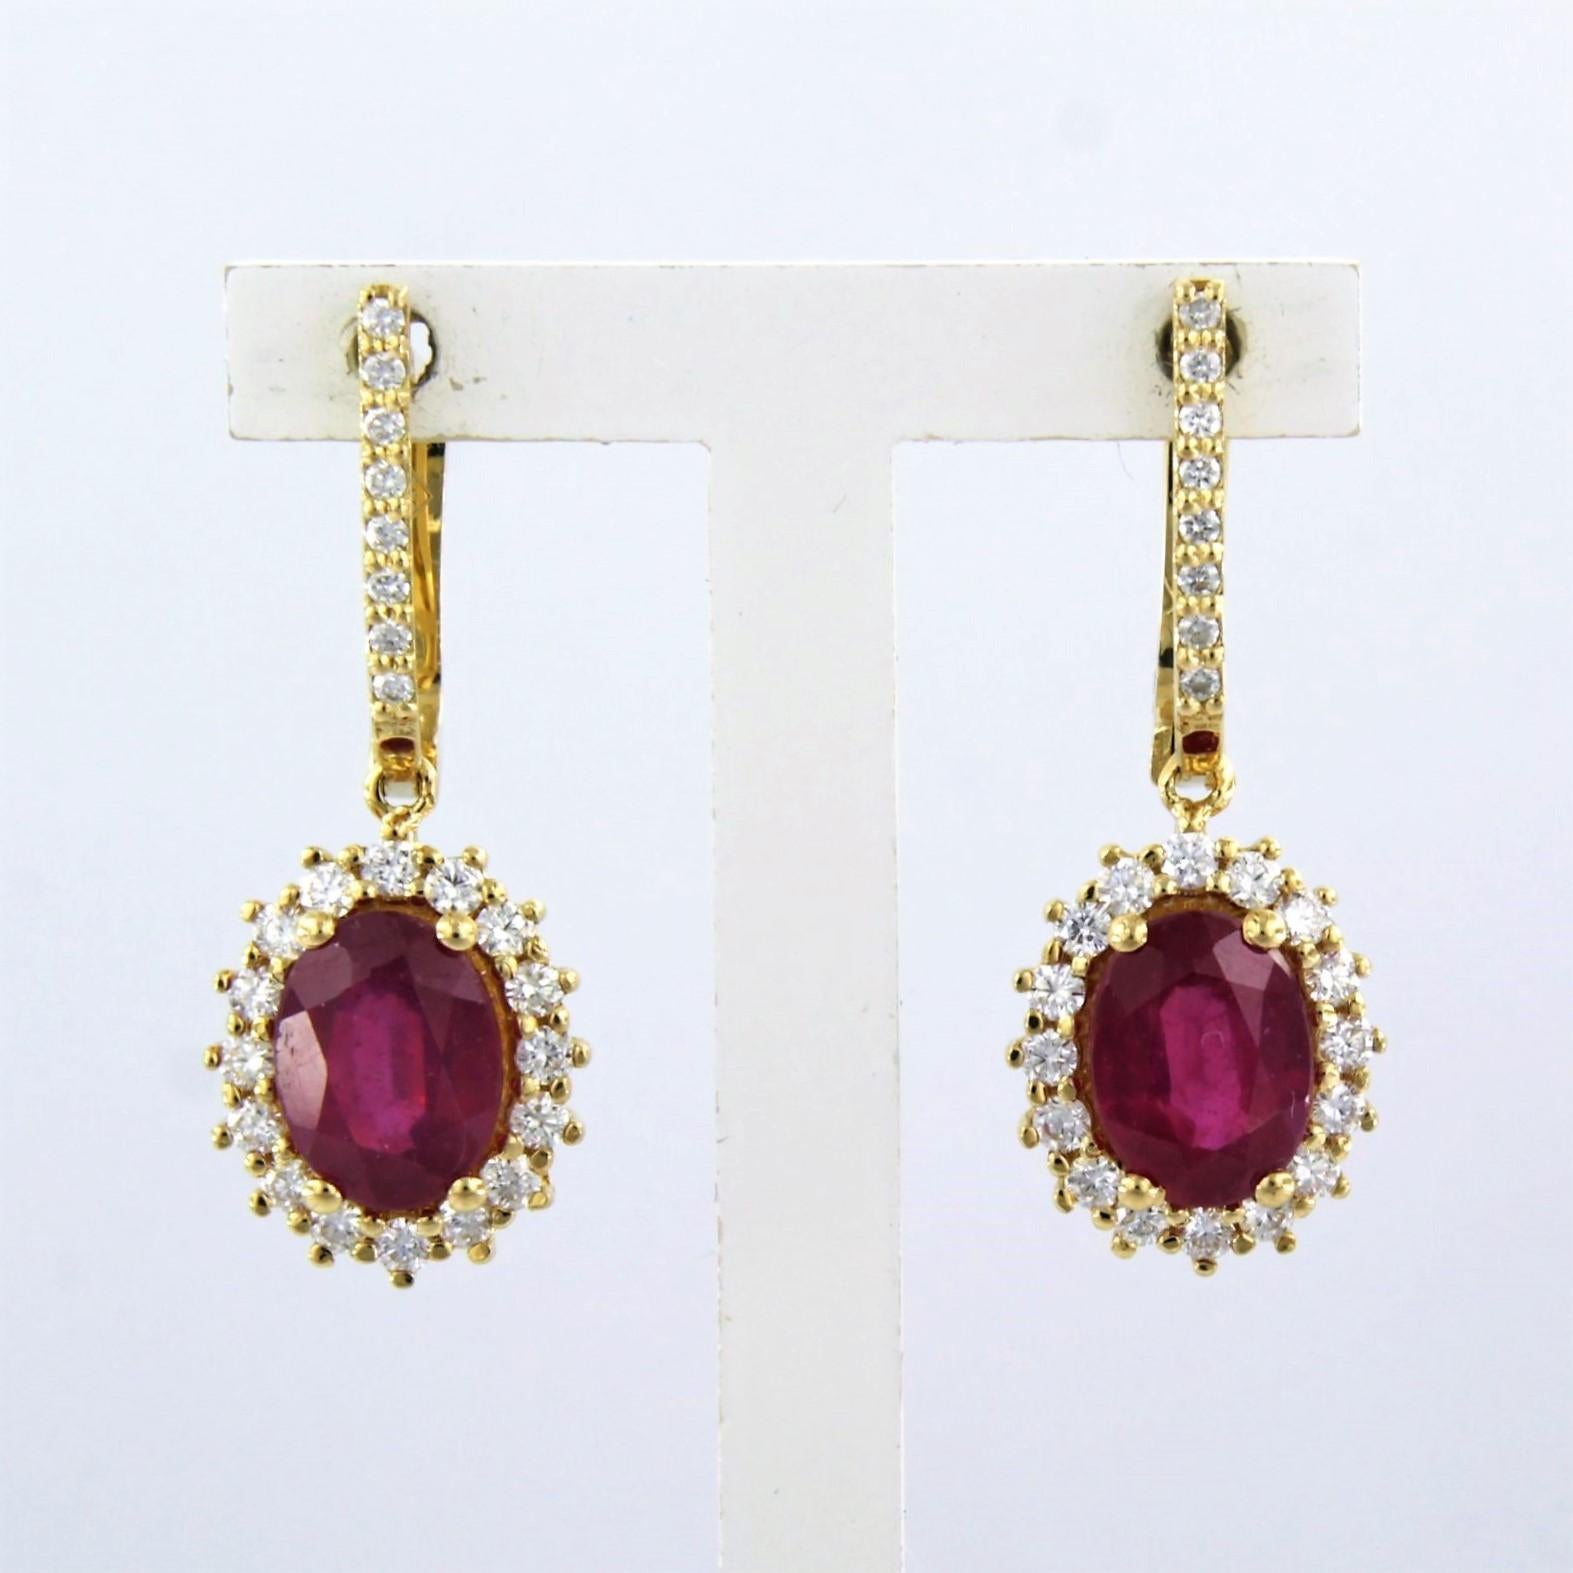 18k yellow gold earrings set with ruby ​​to. 3.40 ct and brilliant cut diamonds up to. 0.64ct - F/G - VS/SI

detailed description:

the size of the earring is 2.5 cm high and 1.0 cm wide

weight: 6.7 grams

occupied with

- 2 x 7.5 mm x 6.0 mm oval